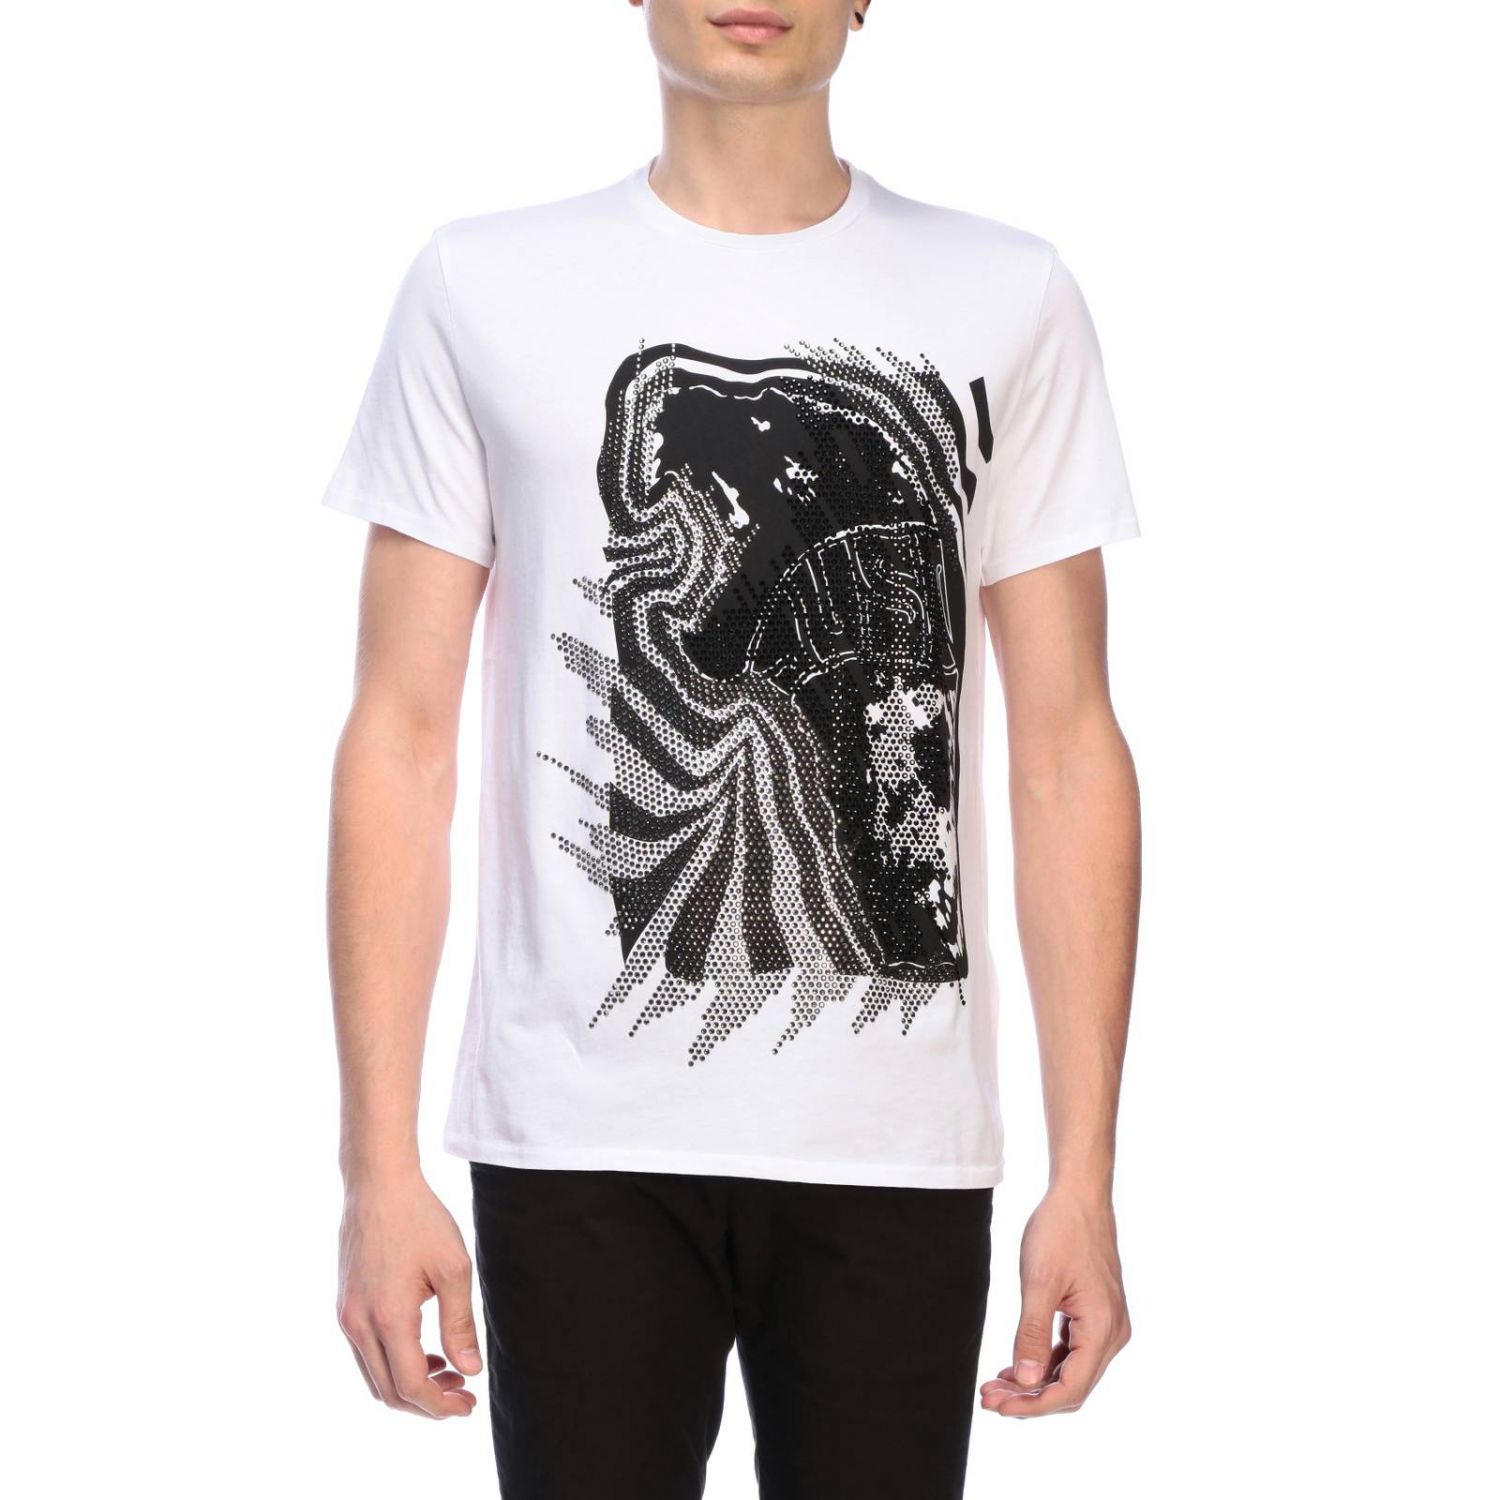 Just Cavalli Outlet: t-shirt for man - White | Just Cavalli t-shirt ...